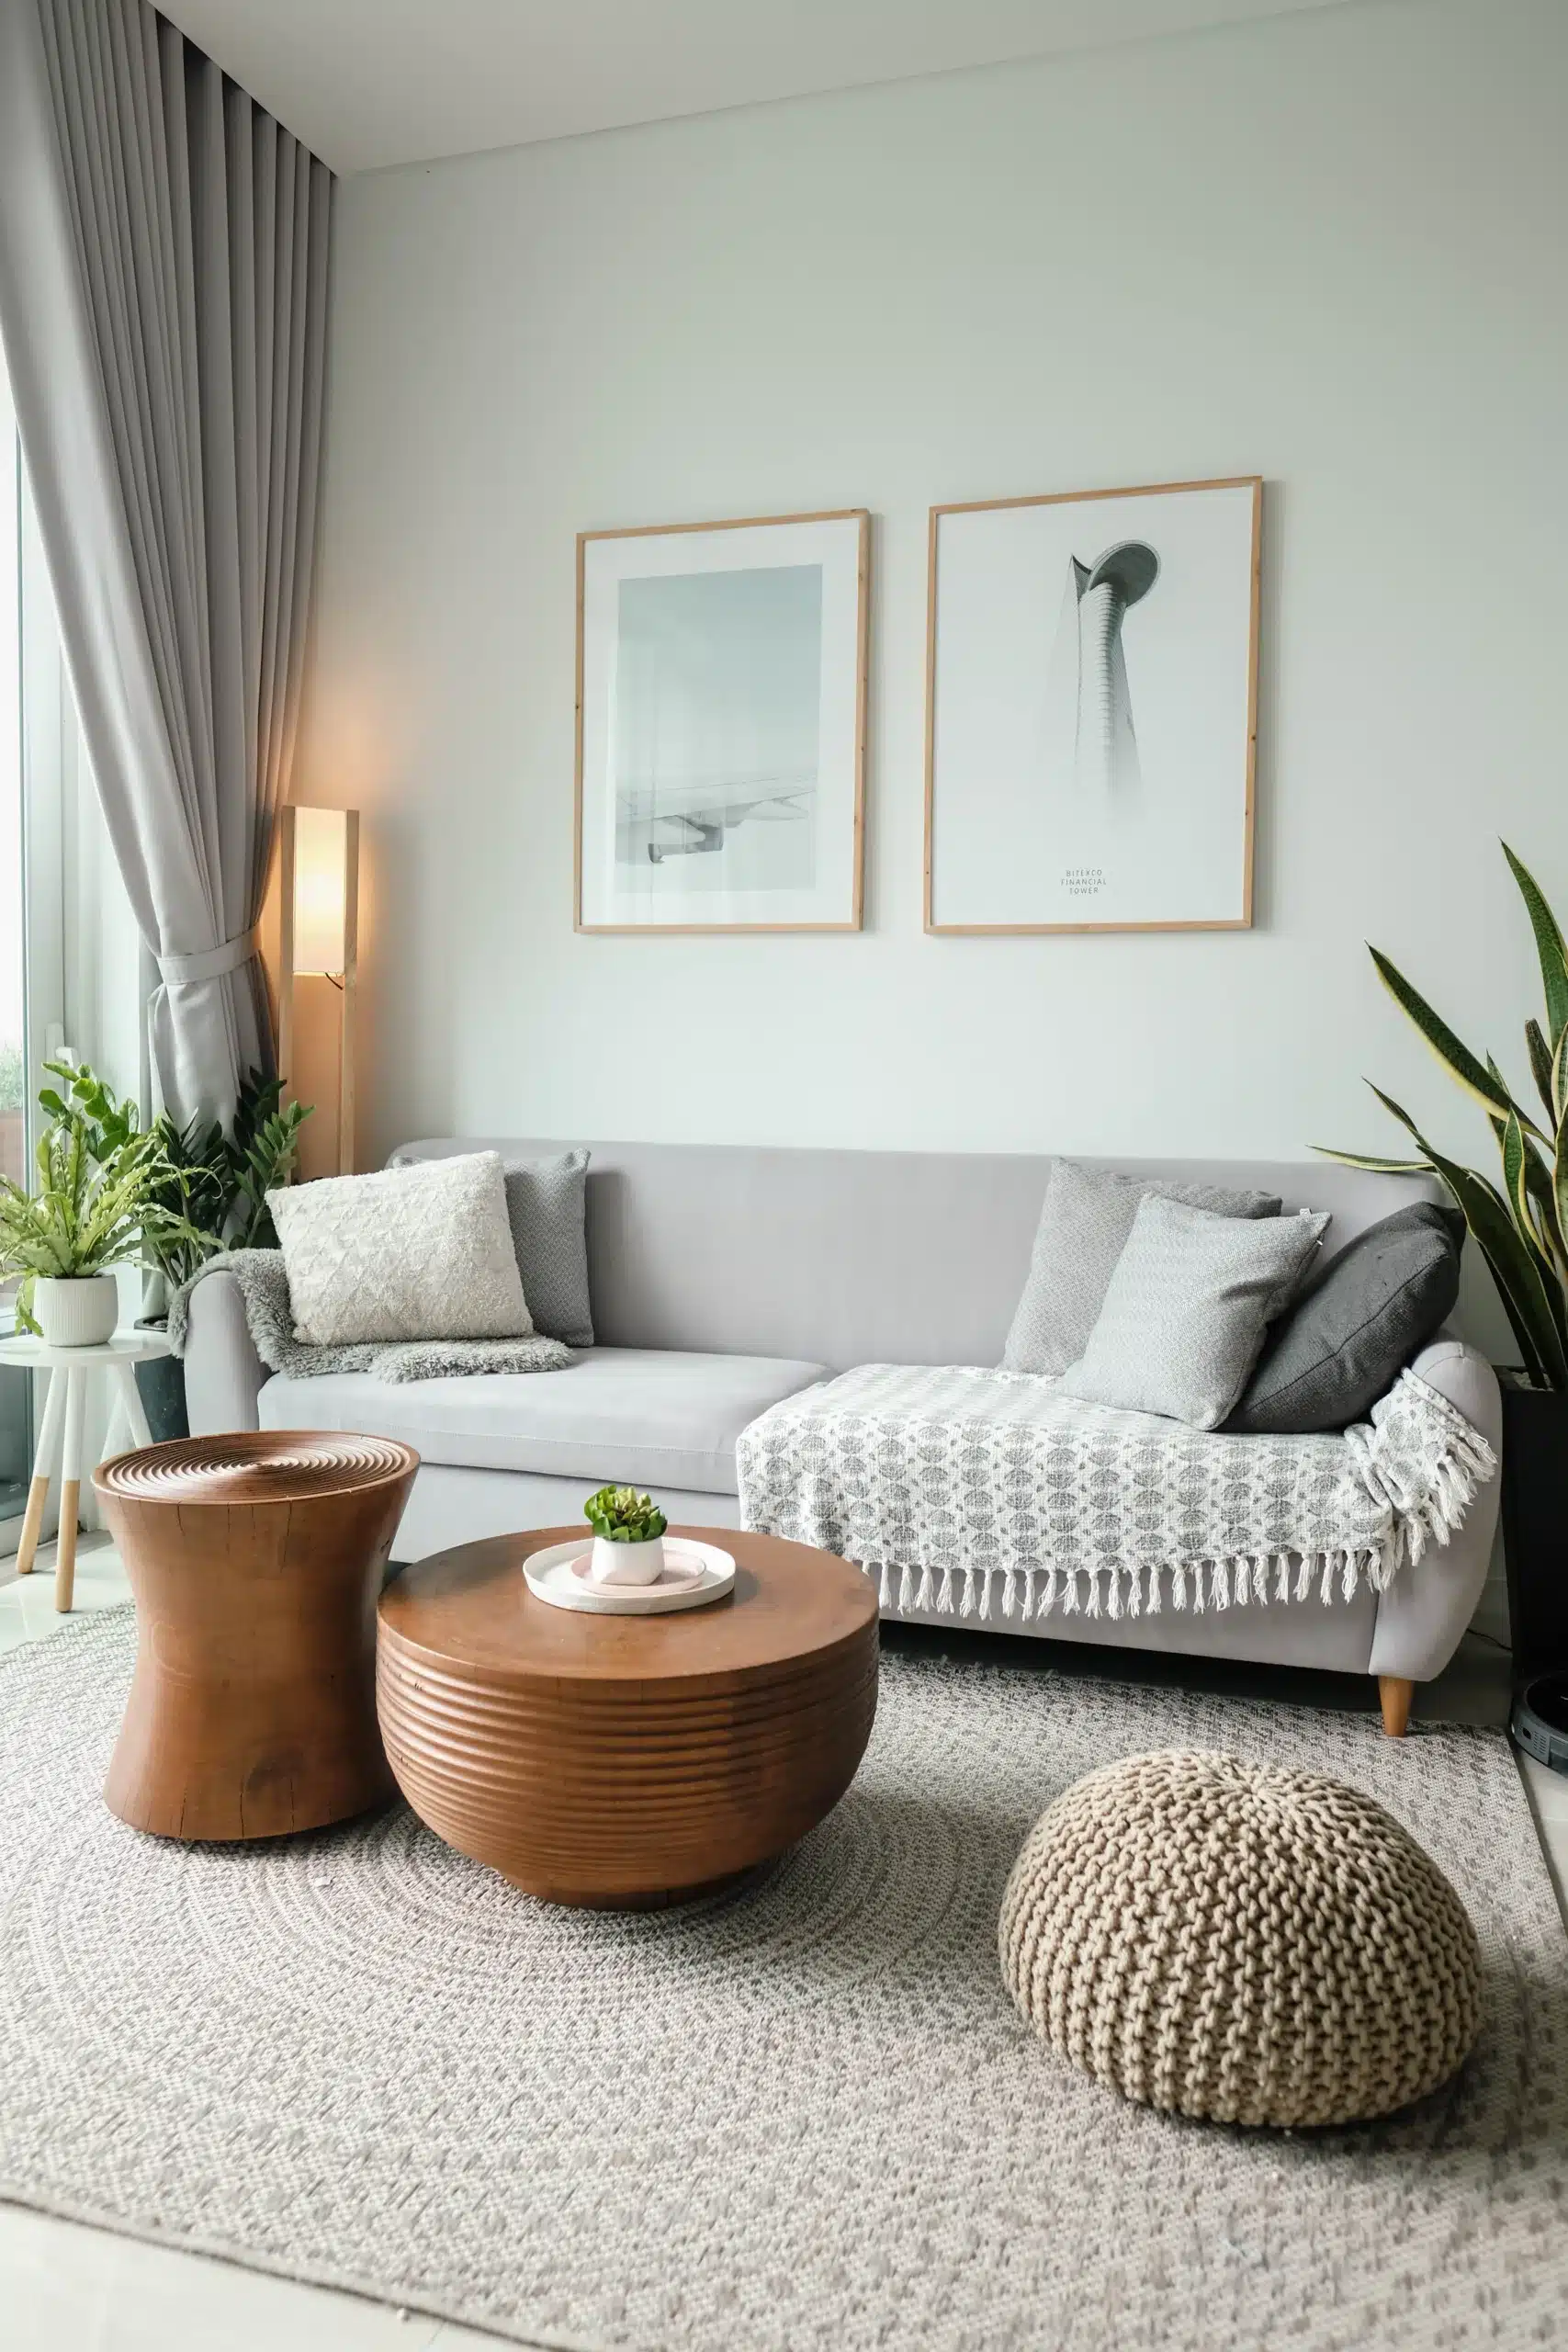 Minimalist Interior Design: Simplify Your Space and Elevate Your Style